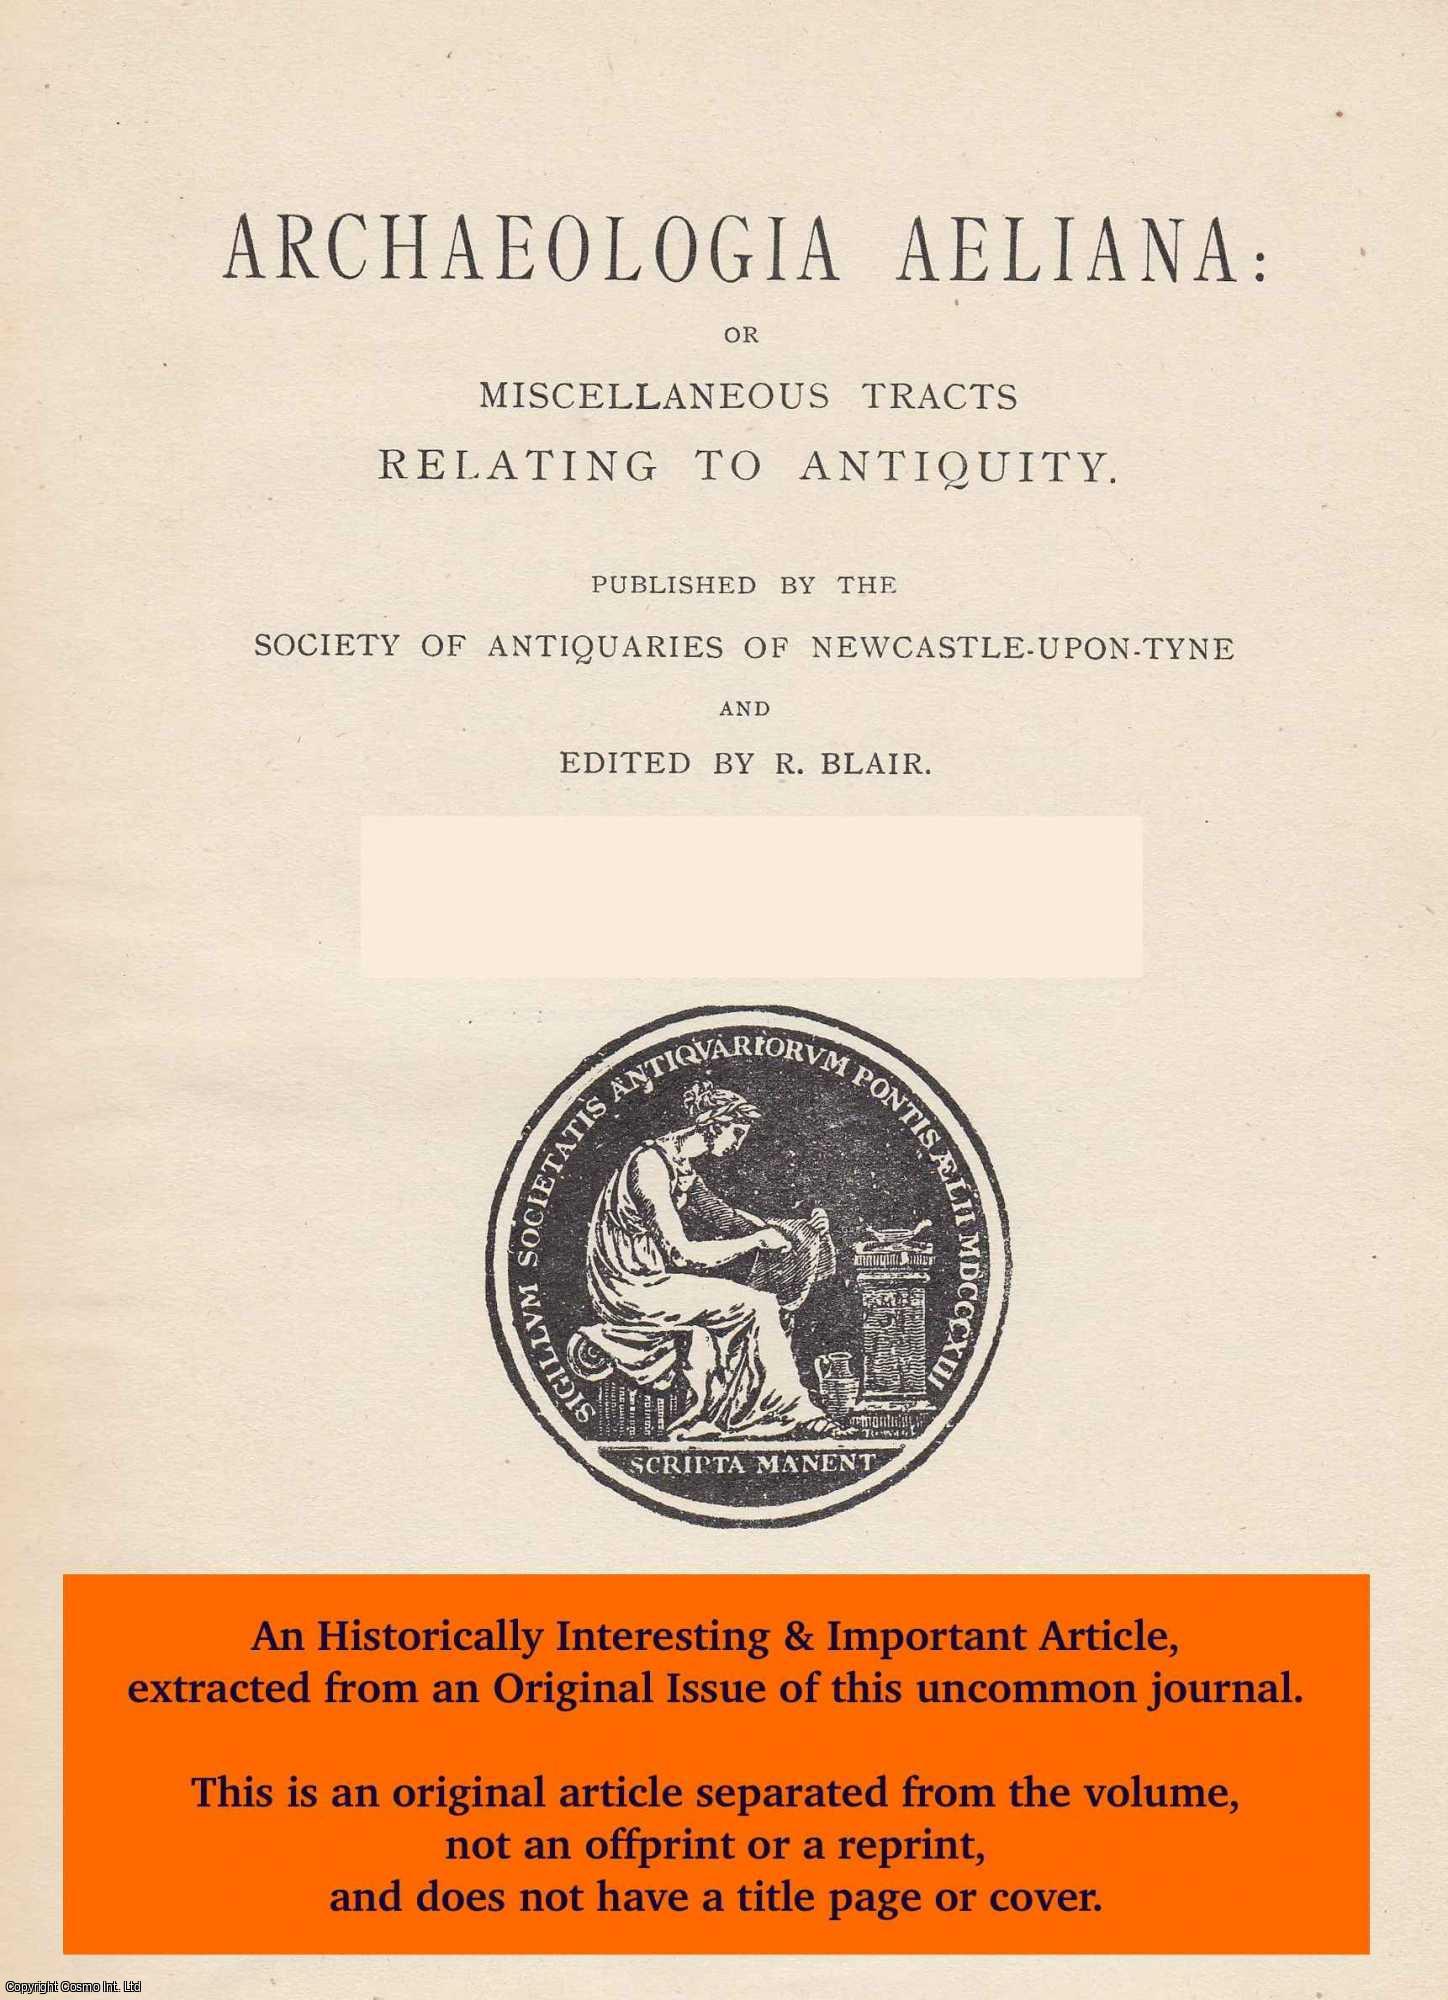 R. B. Hepple, R. B. - Uthred of Boldon. An original article from The Archaeologia Aeliana: or Miscellaneous Tracts Relating to Antiquity, 1920.